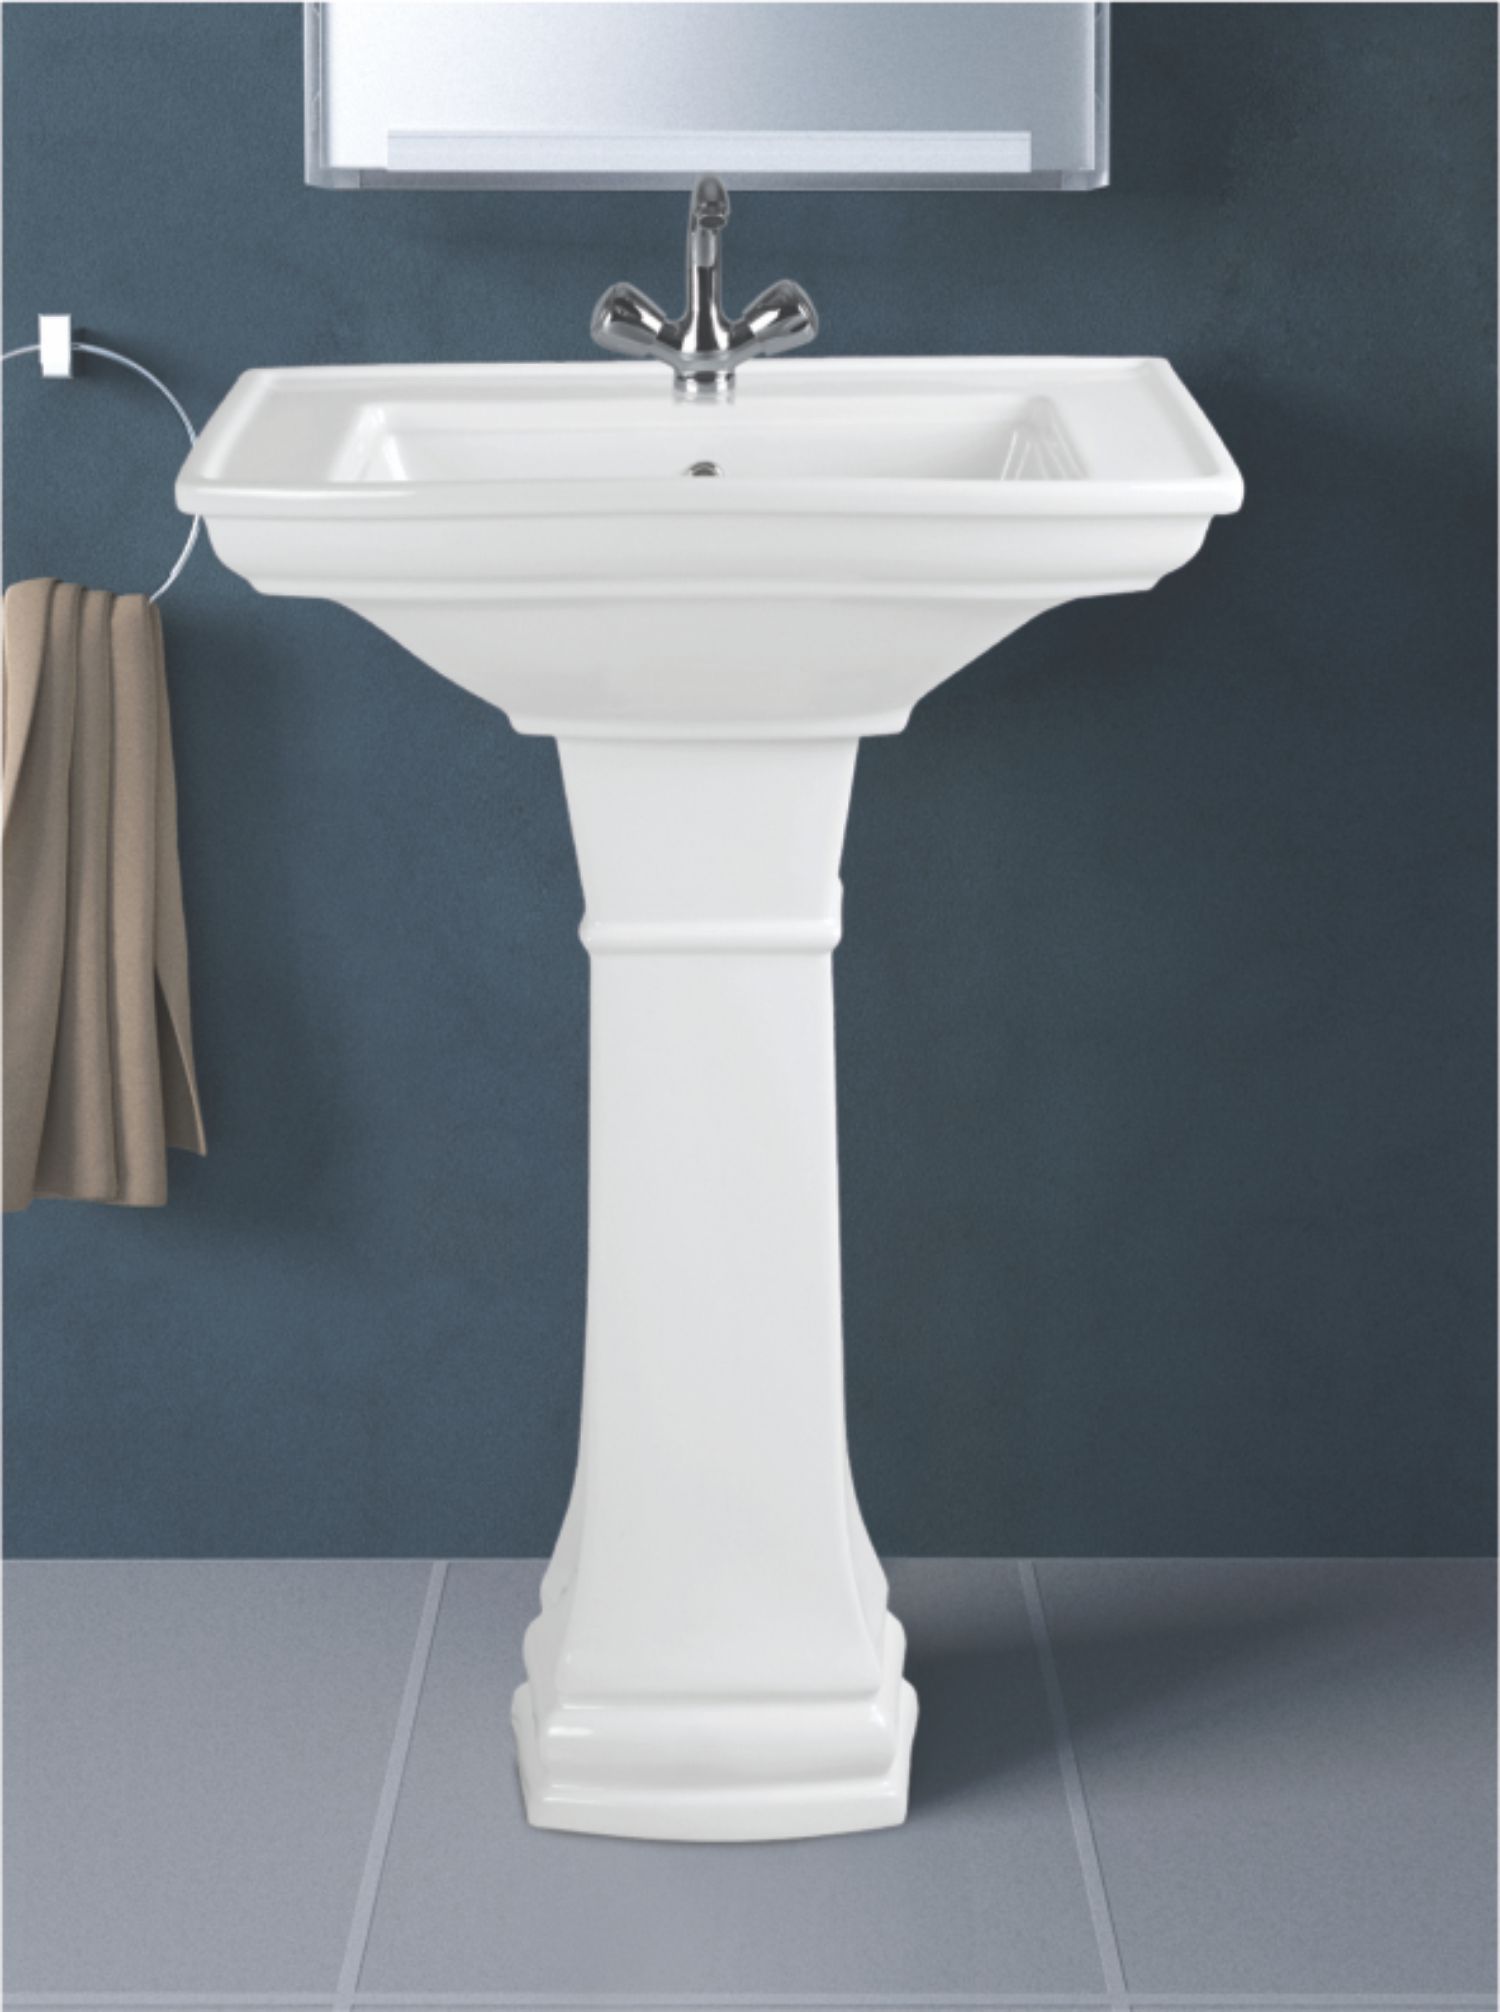 Wholesale Supplier of Wash Basin with Pedestal